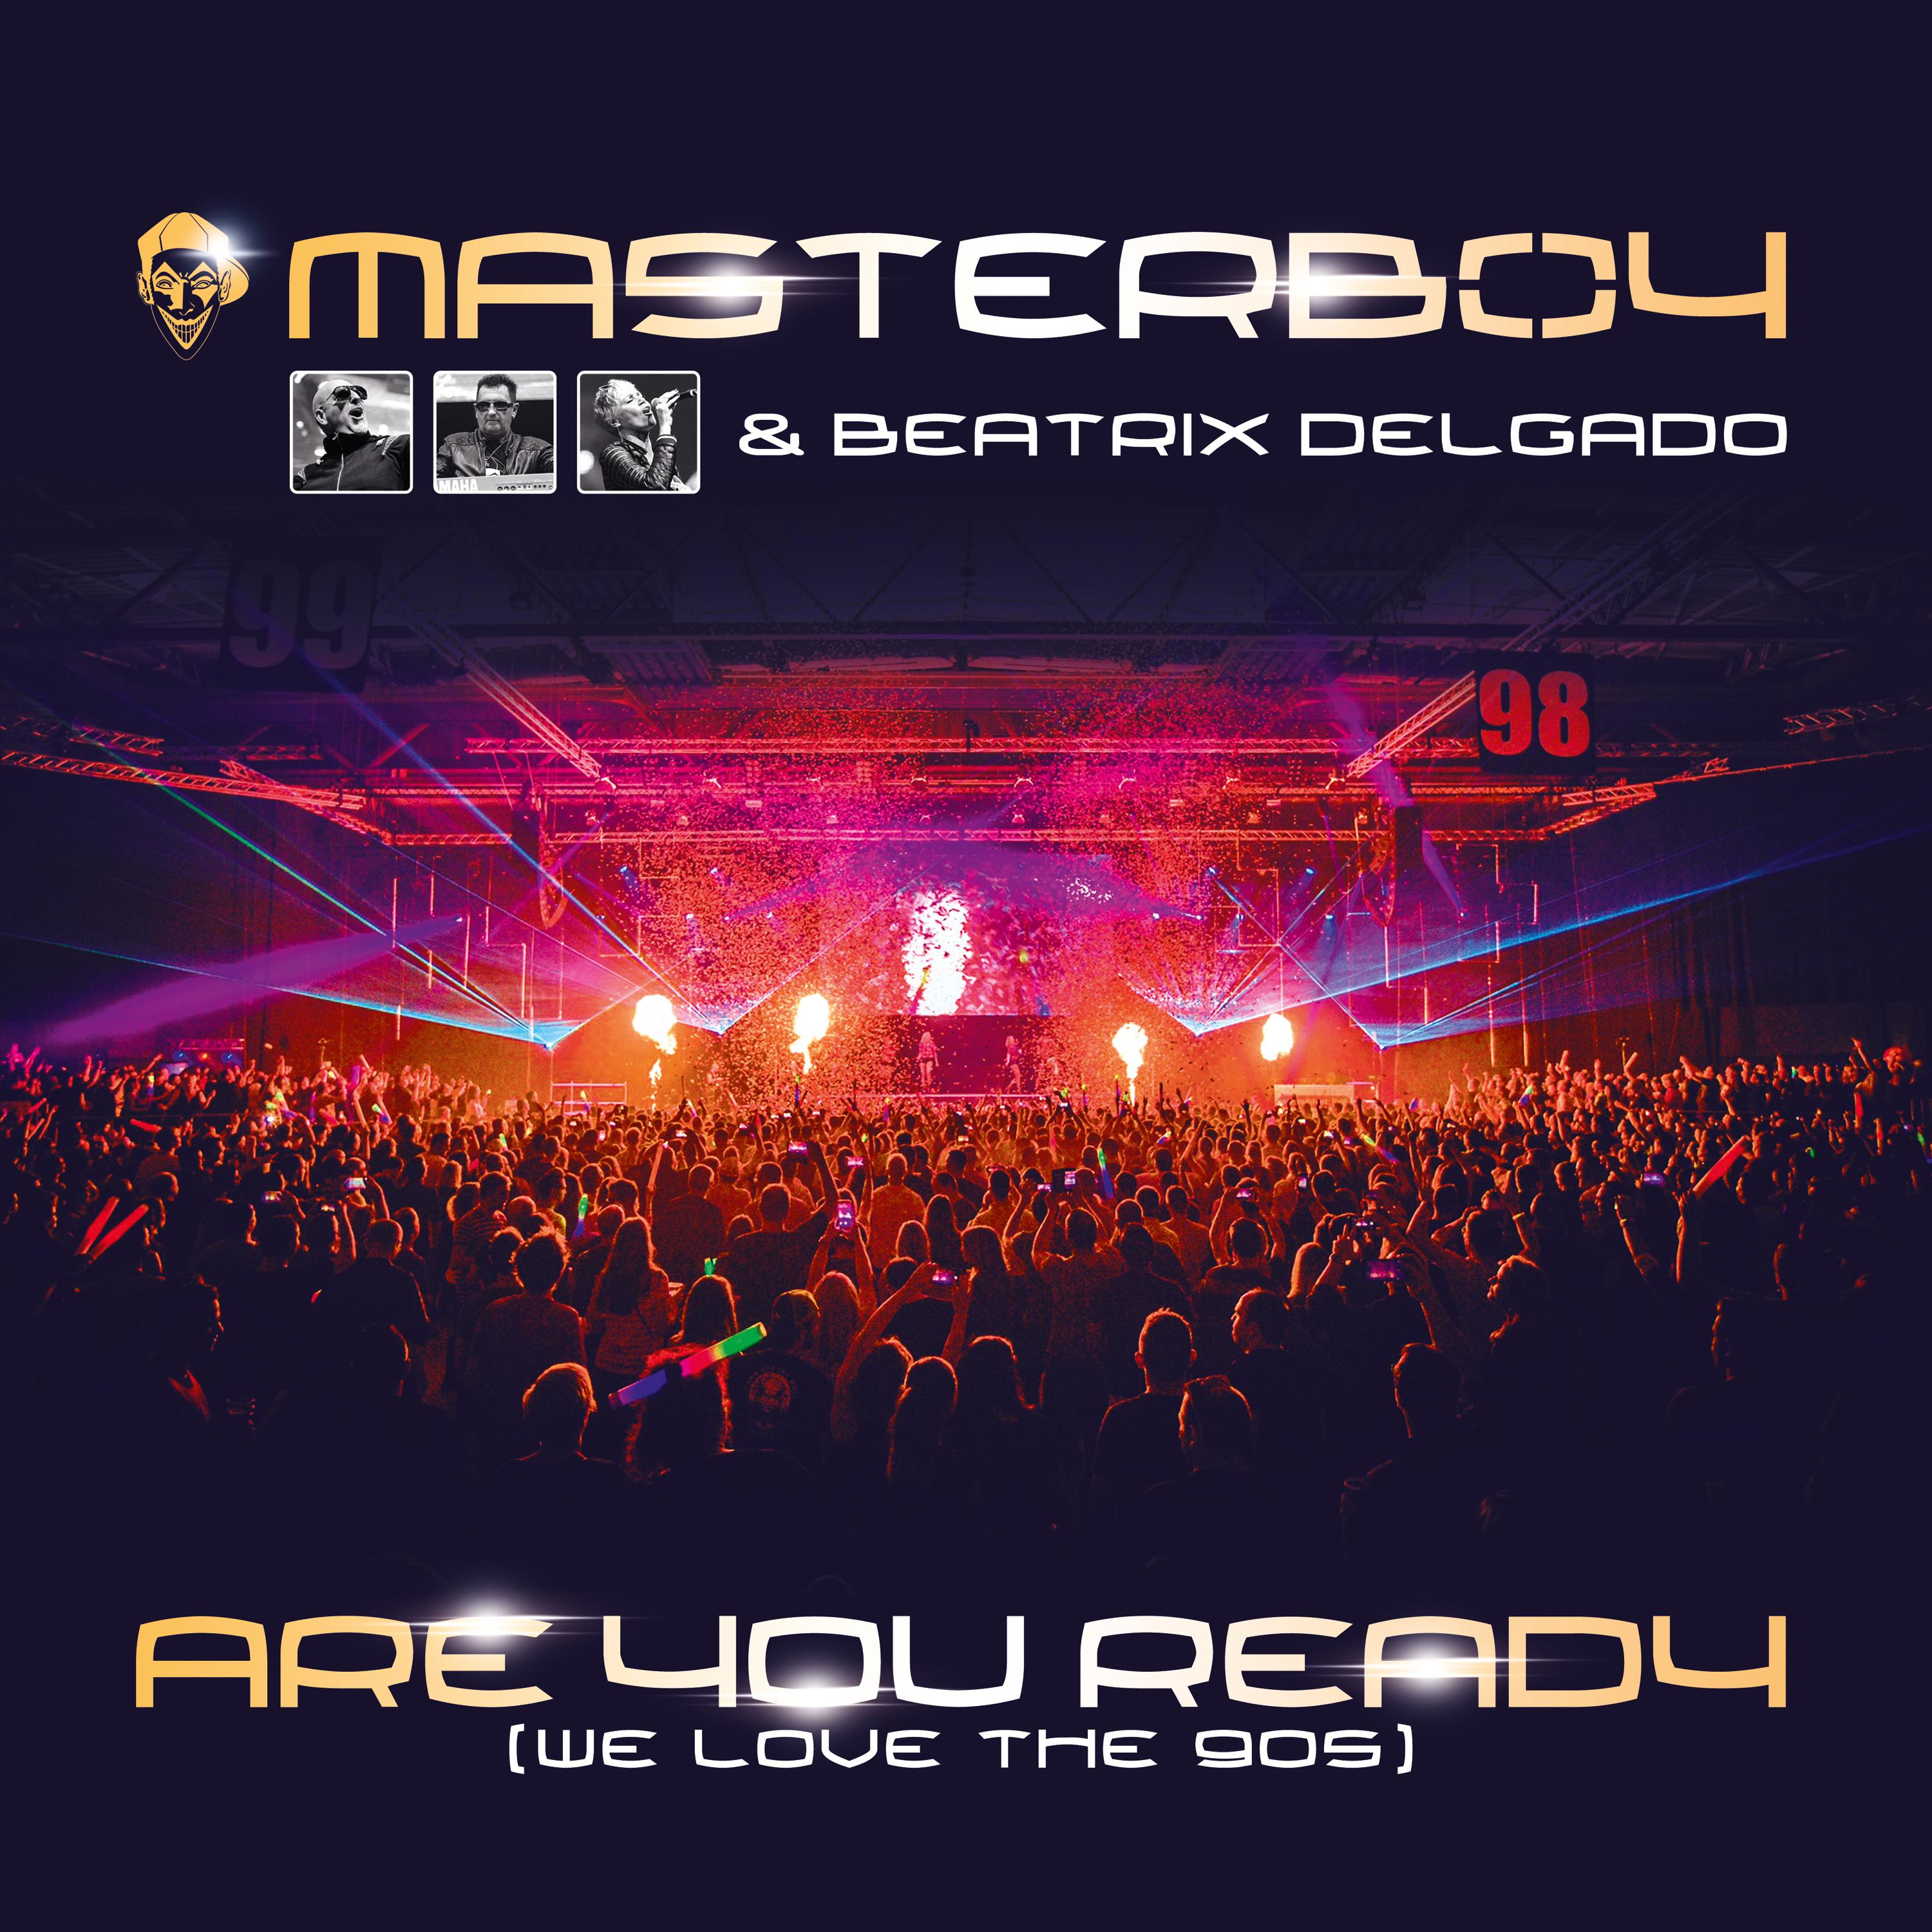 Are You Ready (We Love the 90s) (Empyre One & Enerdizer Edit)